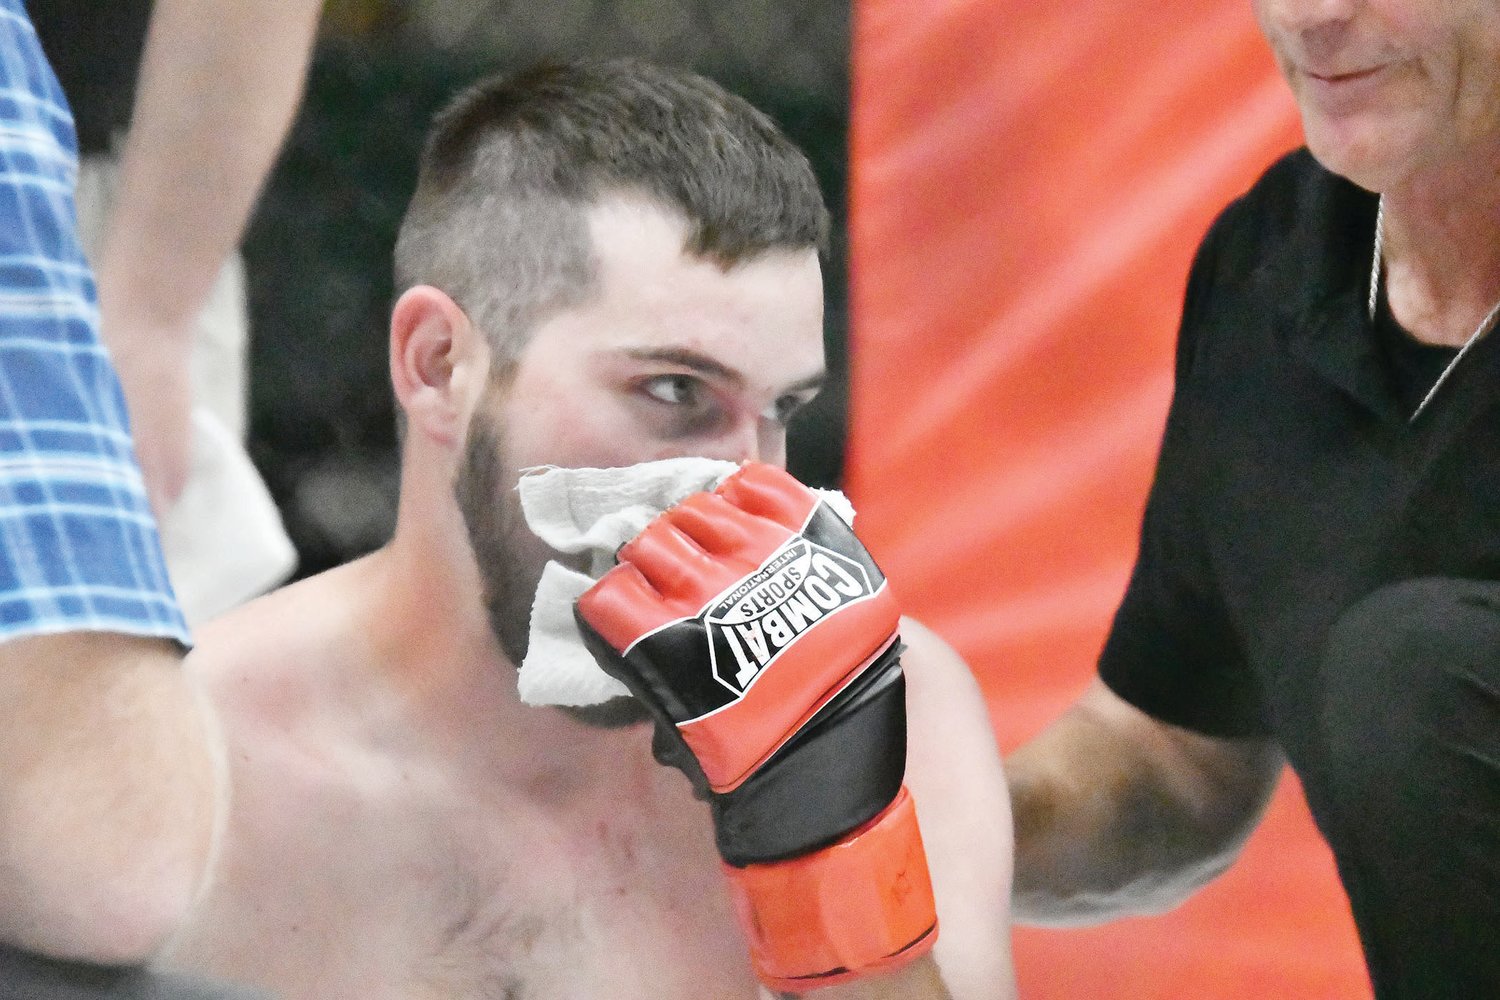 Lucky Gladstone suffered a bloody nose during his mixed martial arts bout with Michael Harper of Kirksville. Harper won at the 2:59 mark of the first period on strikes. Dr. Michael Roach and referee Mike England attended to Gladstone after the match.